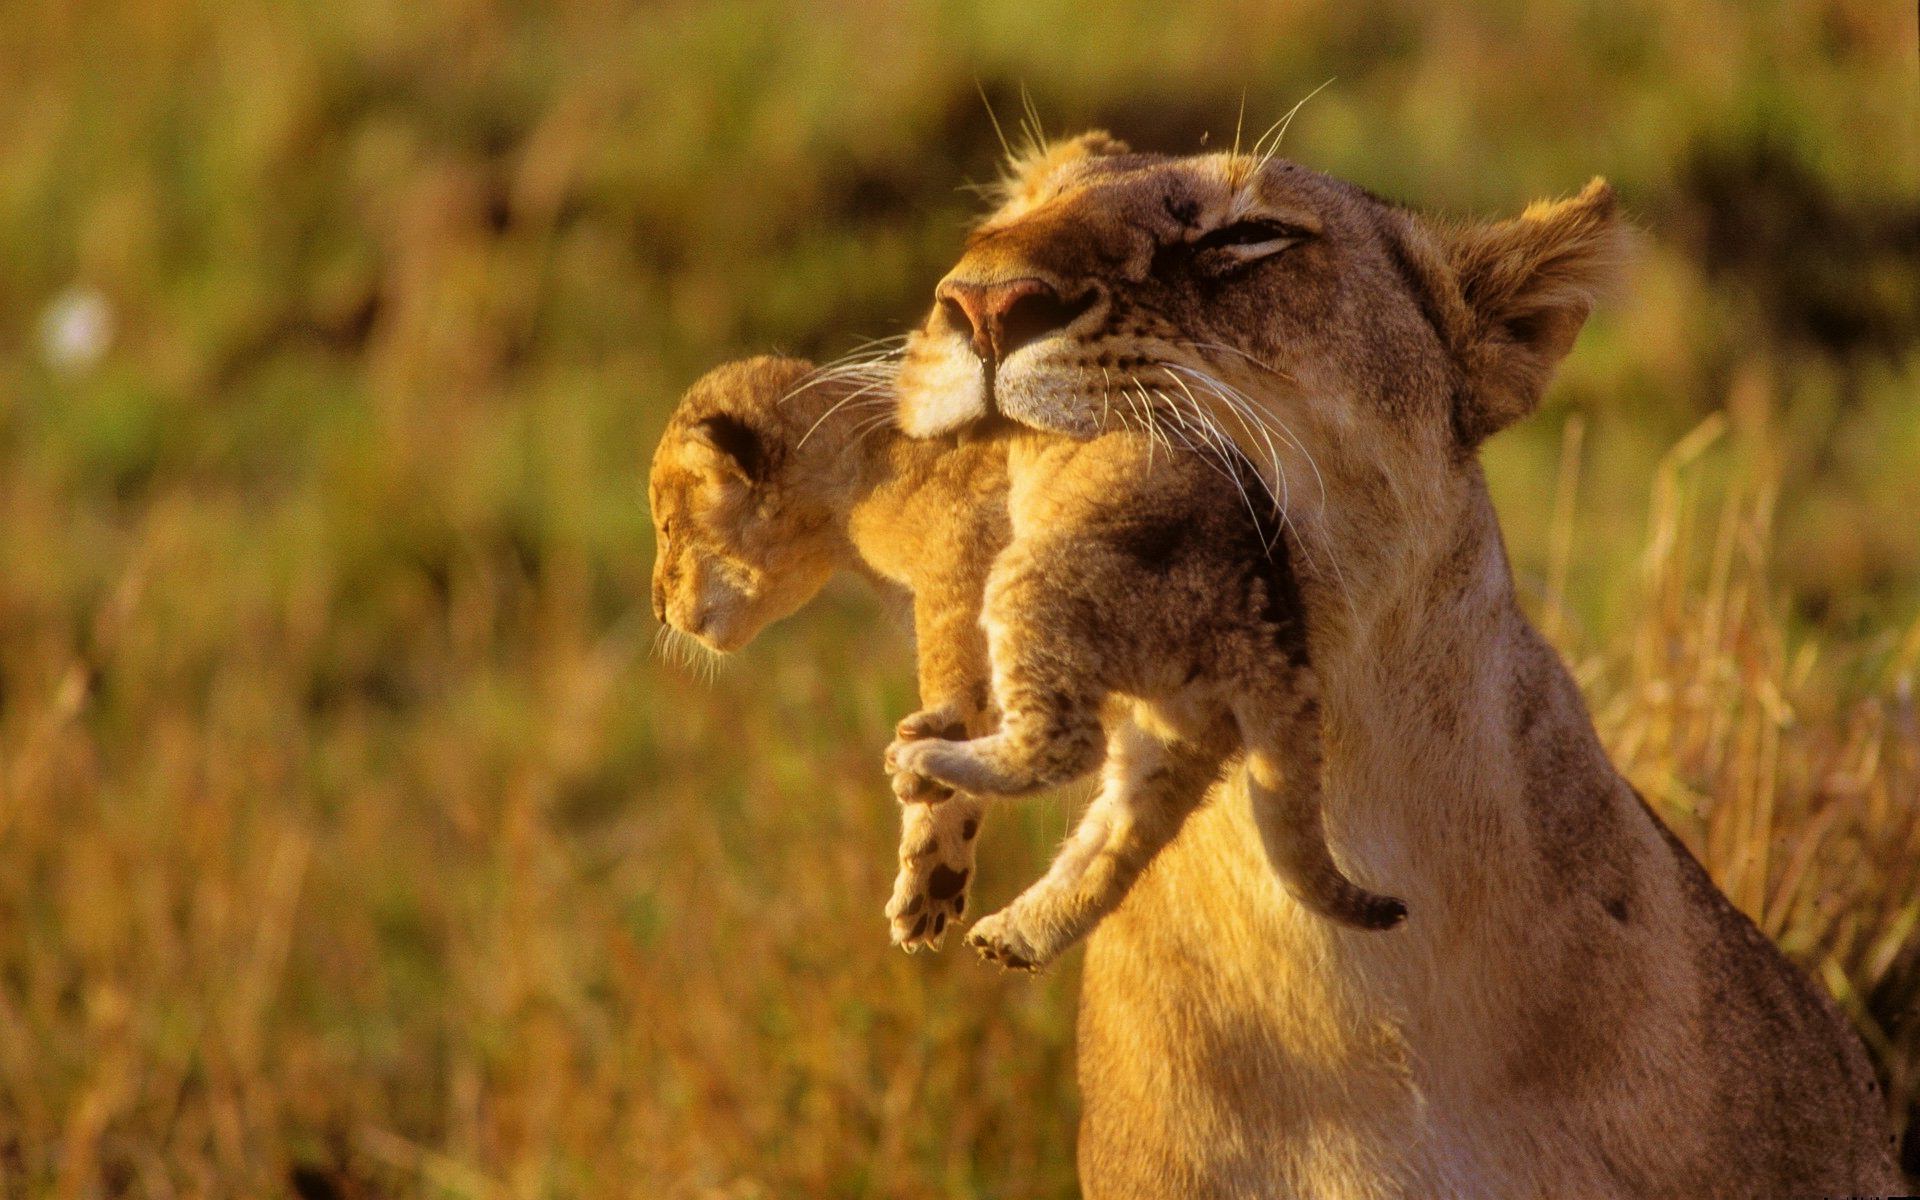 lion_mother_with_baby_lion_wallpaper.jpg